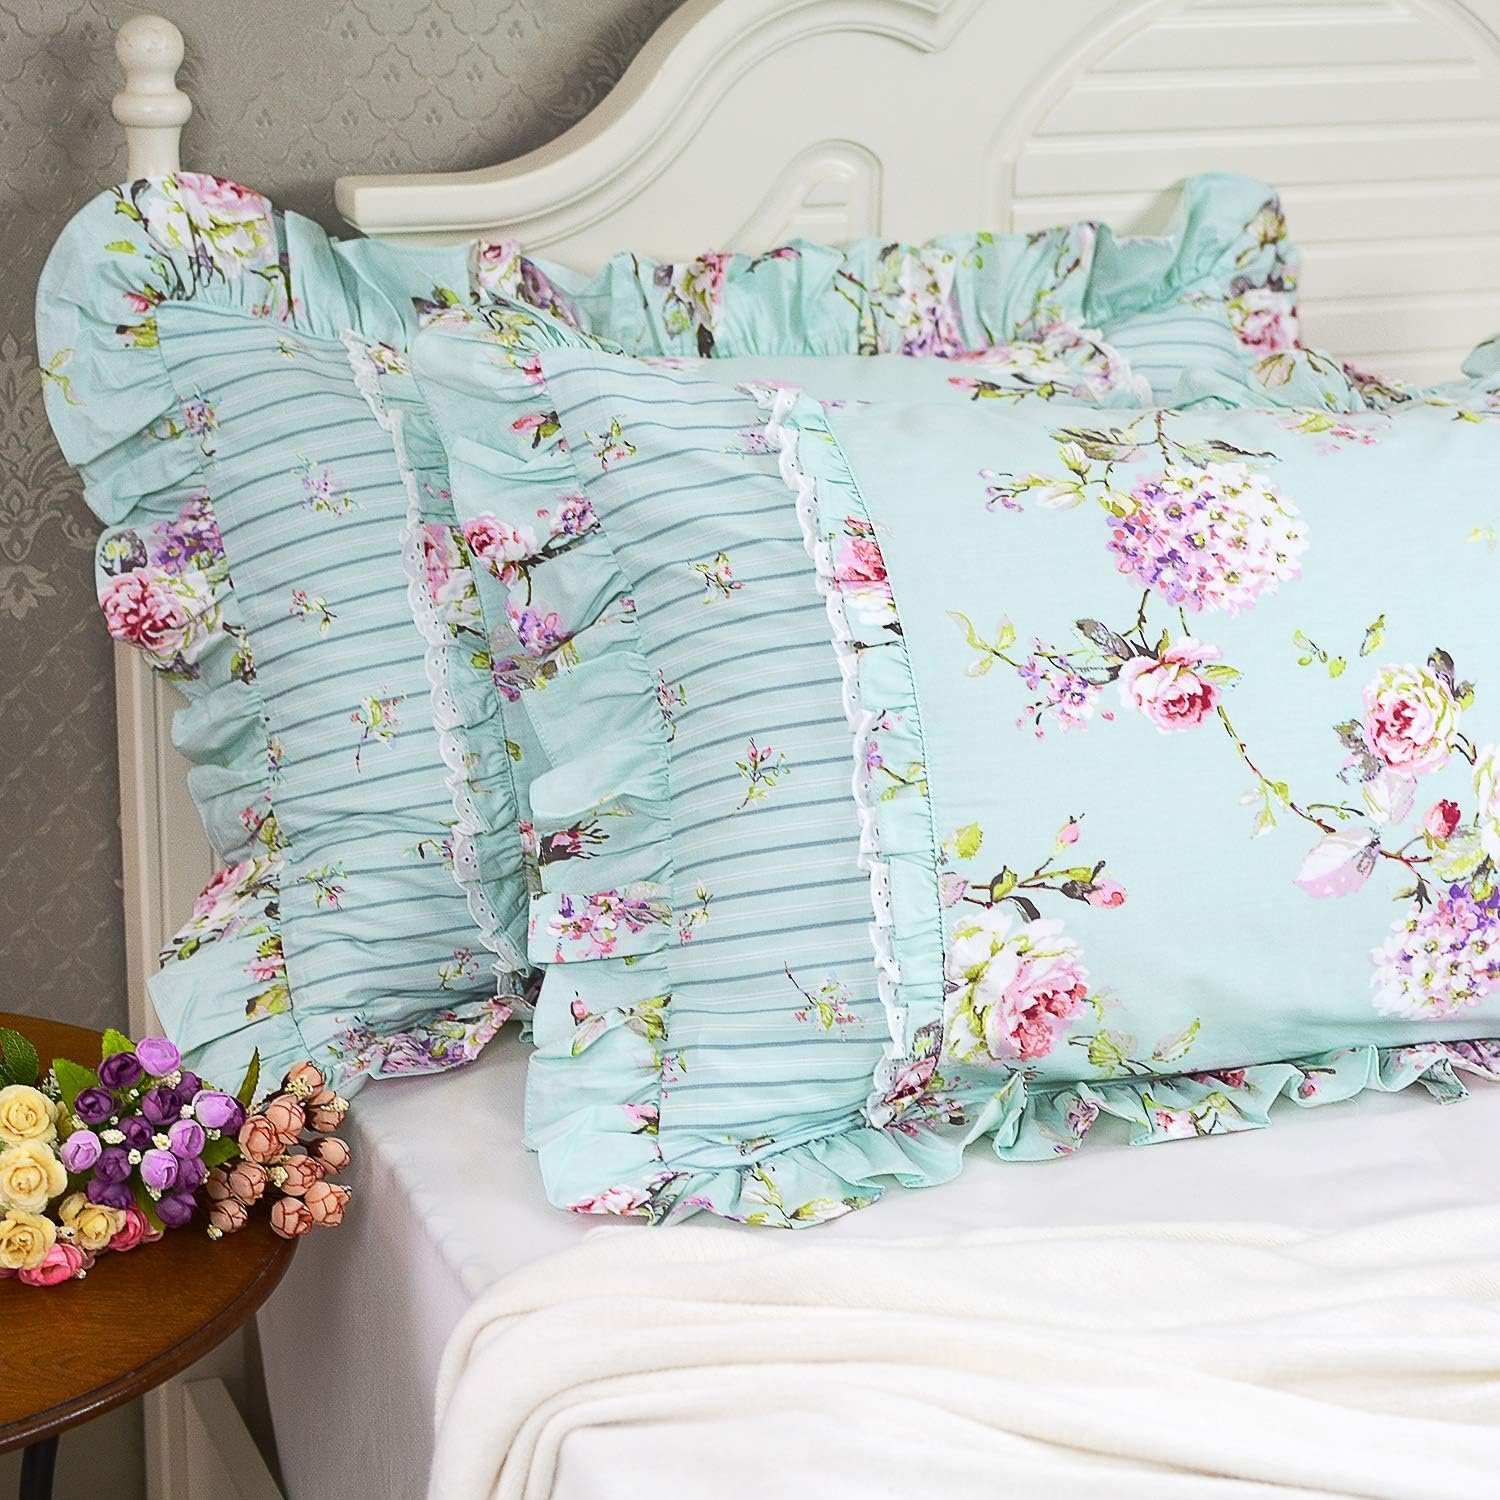 FADFAY Farmhouse Style Pillowcases Rose and Hydrangea Blue-Green Stripe Elegant Country Style 100% Cotton Vintage Lace Ruffles Bedding Pillow Covers Exquisite Craft Standared Size 19 x 29